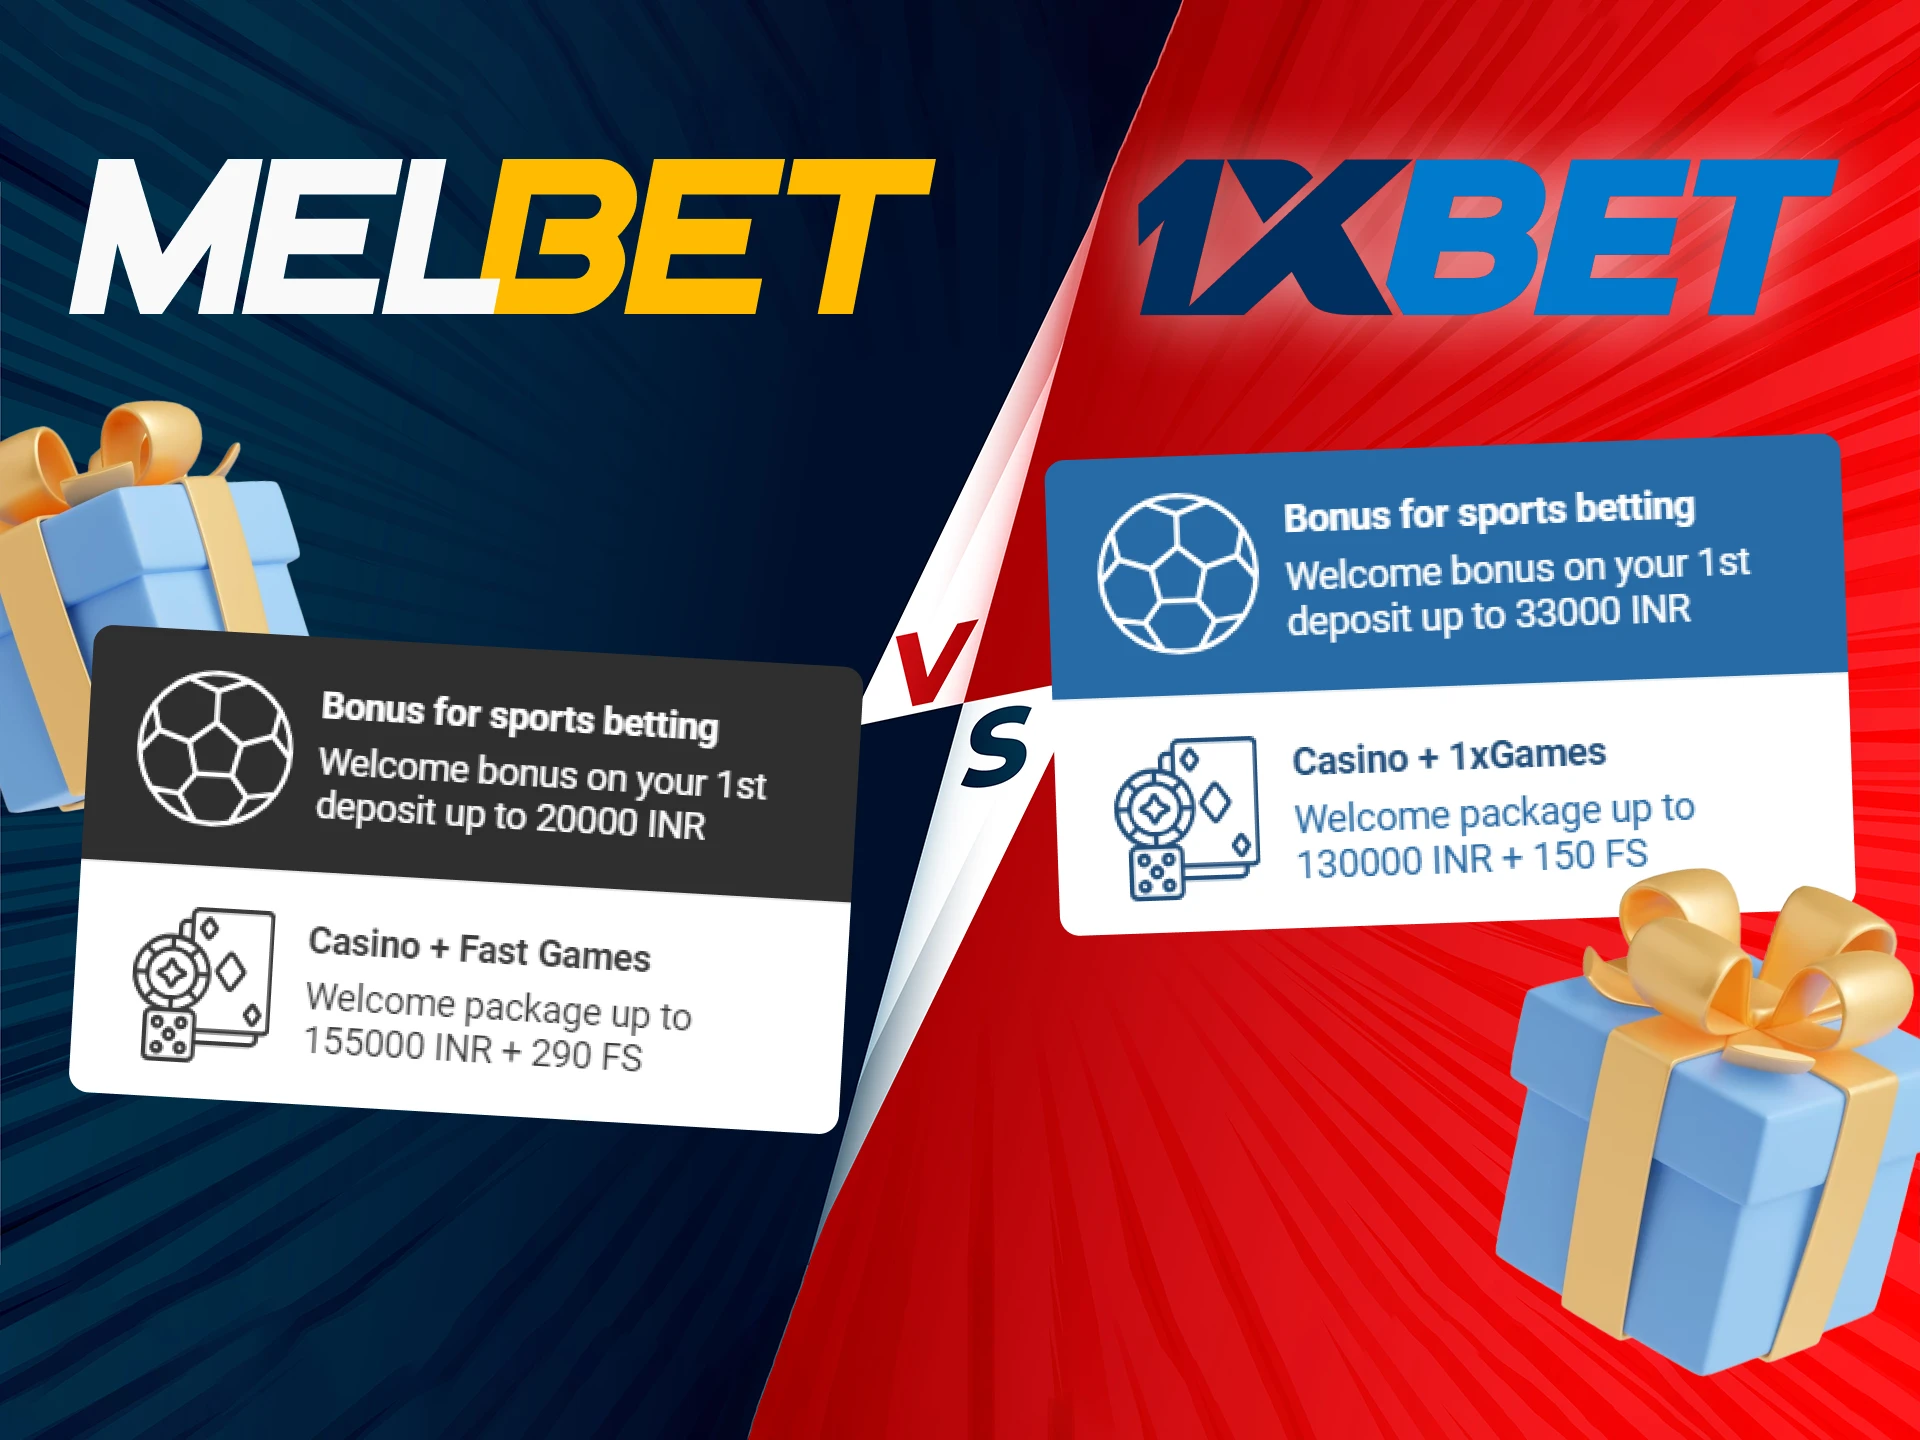 Get your welcome bonuses after registration at 1xbet and Melbet.